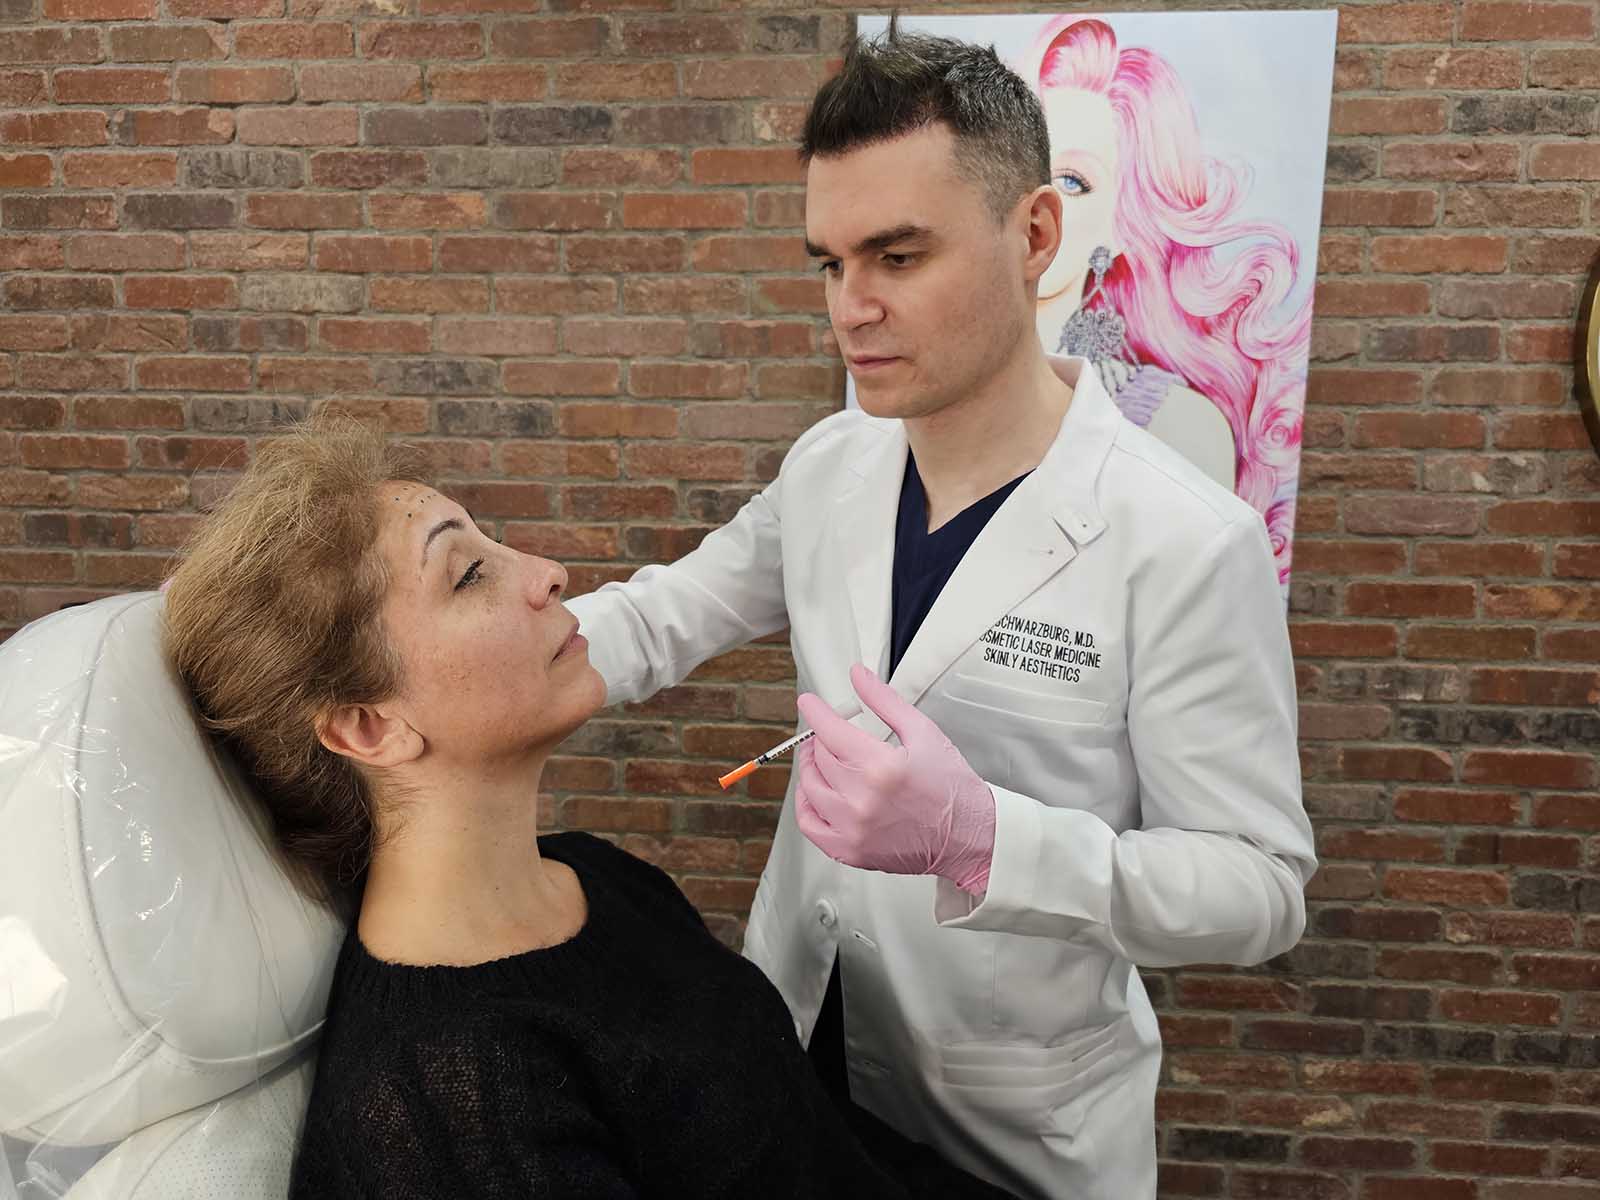 Dr. Schwarzburg provides consultation prior to treatment at Skinly Aesthetcis